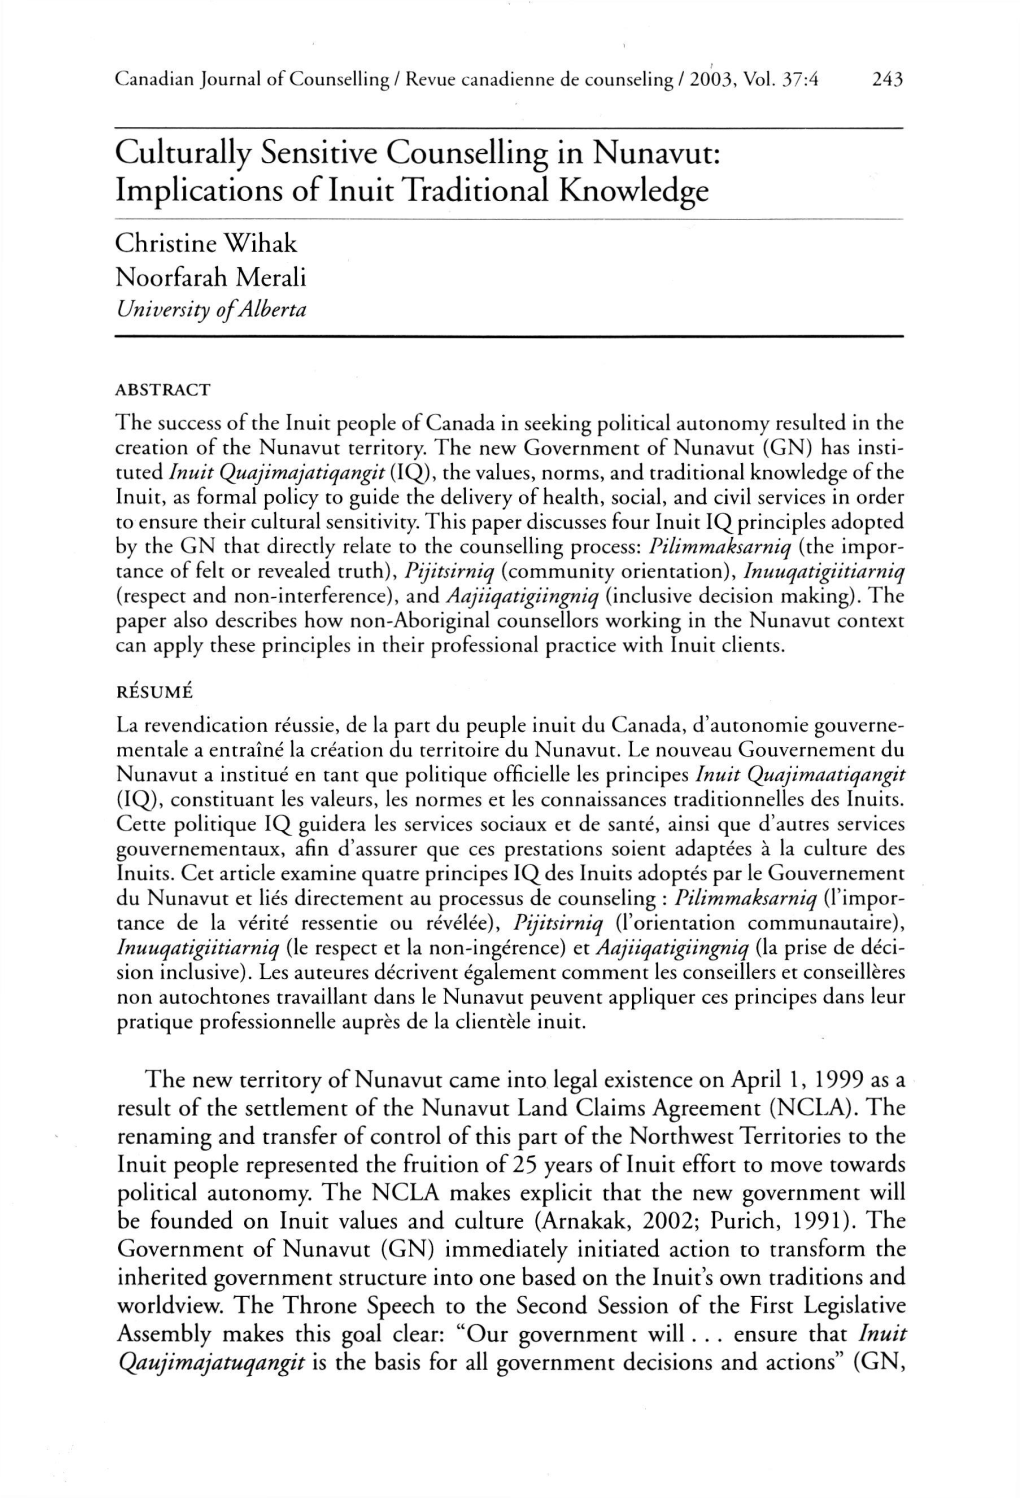 Culturally Sensitive Counselling in Nunavut: Implications of Inuit Traditional Knowledge